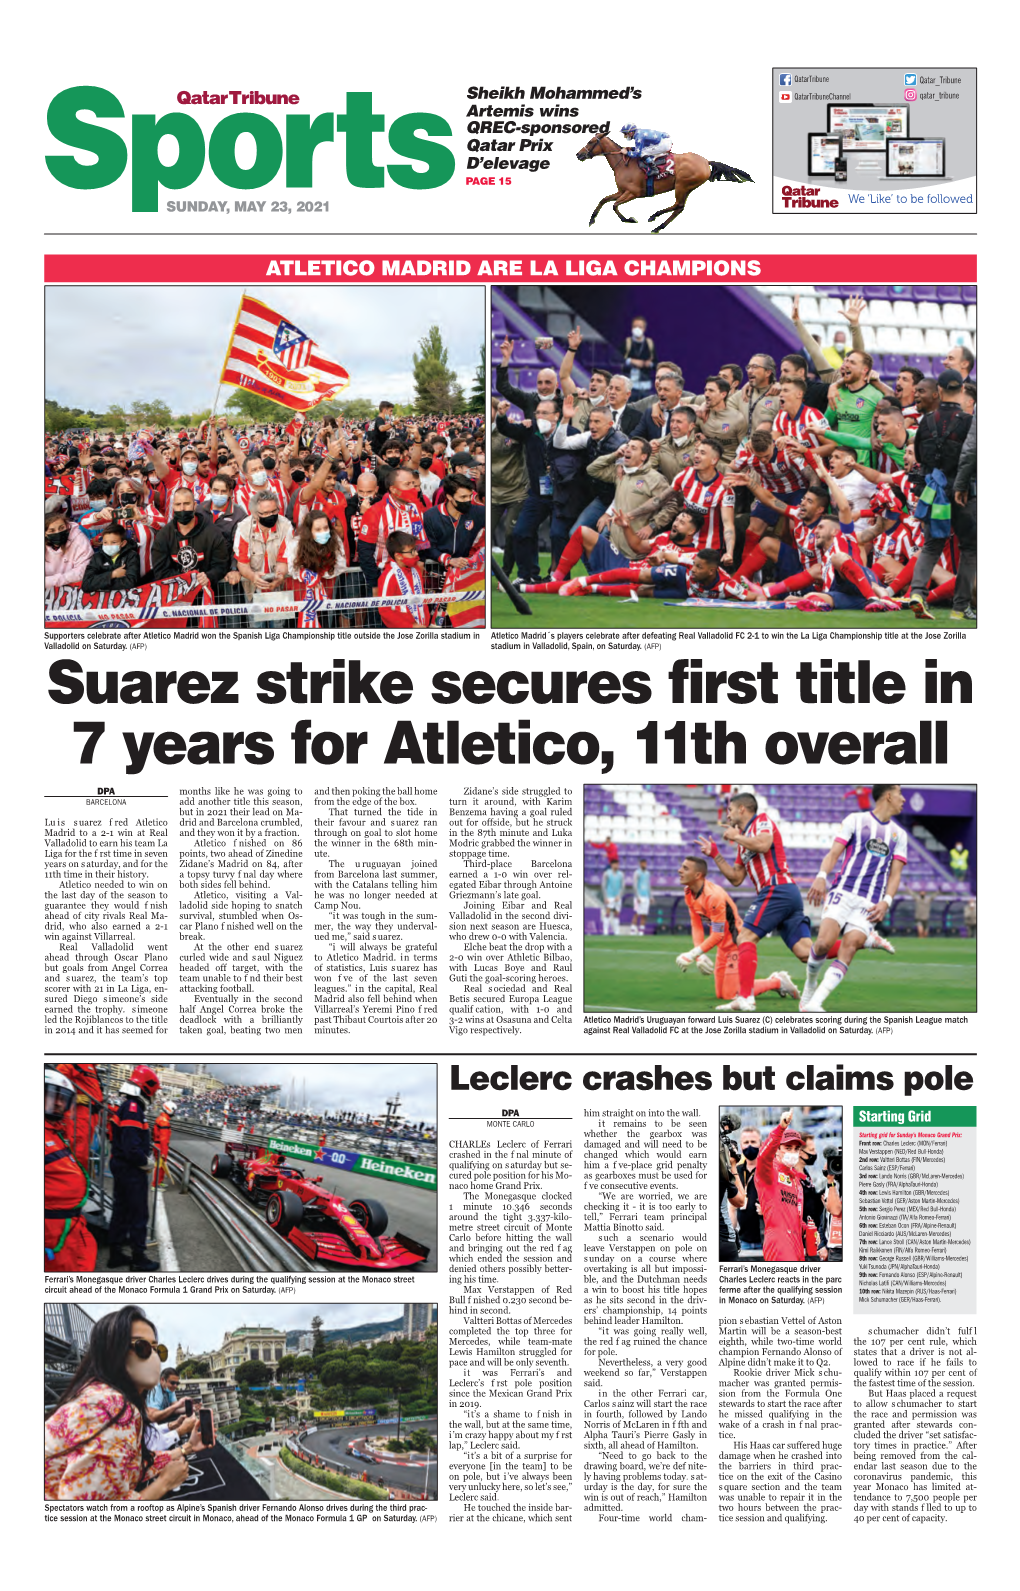 Suarez Strike Secures First Title in 7 Years for Atletico, 11Th Overall